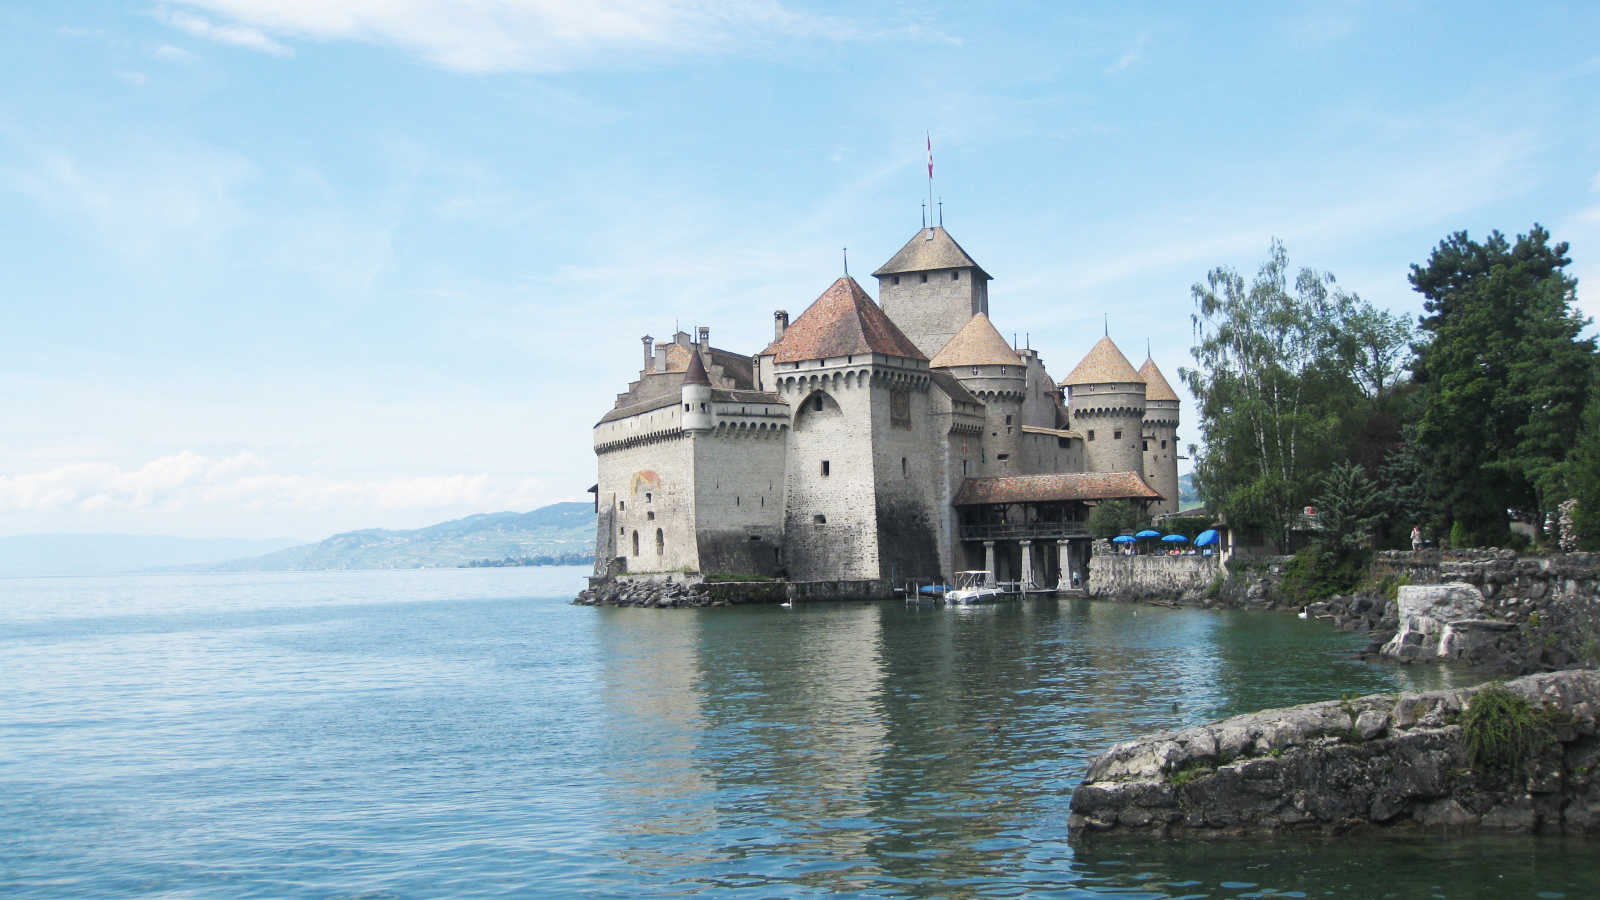 Castle in the resort of Evian, France